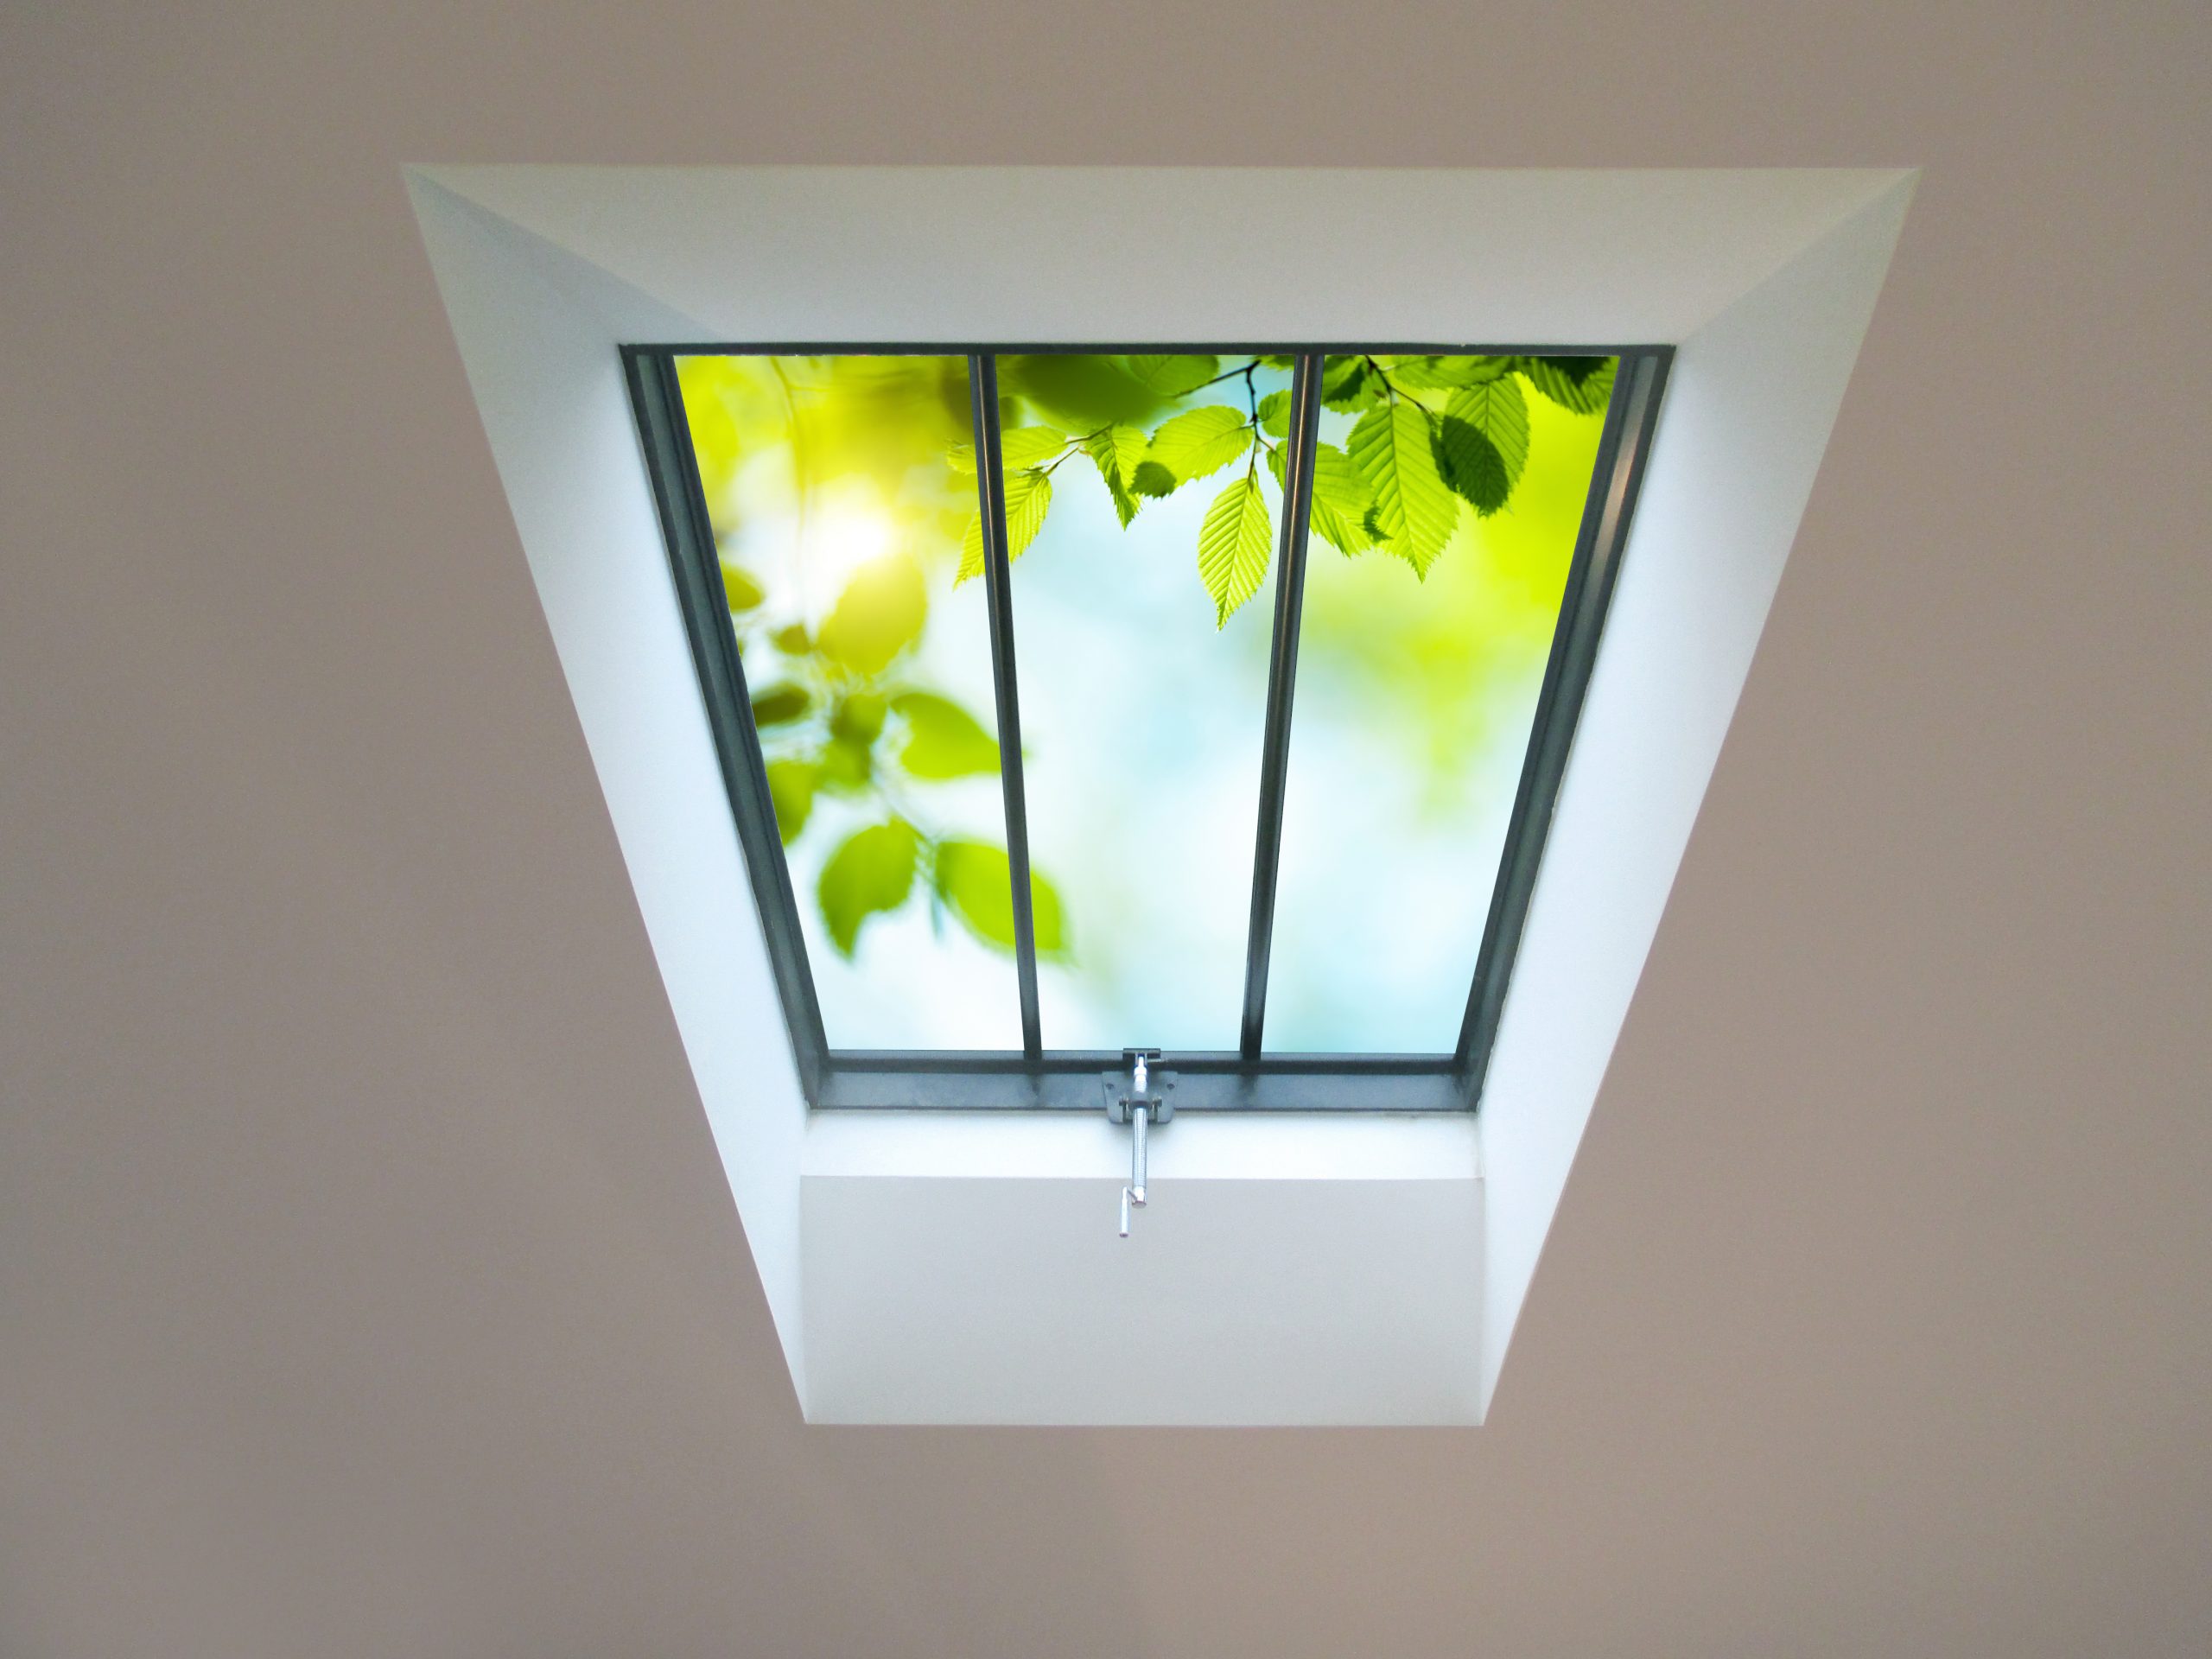 An image of a Clement 4 rooflight with a chrome hand winder.